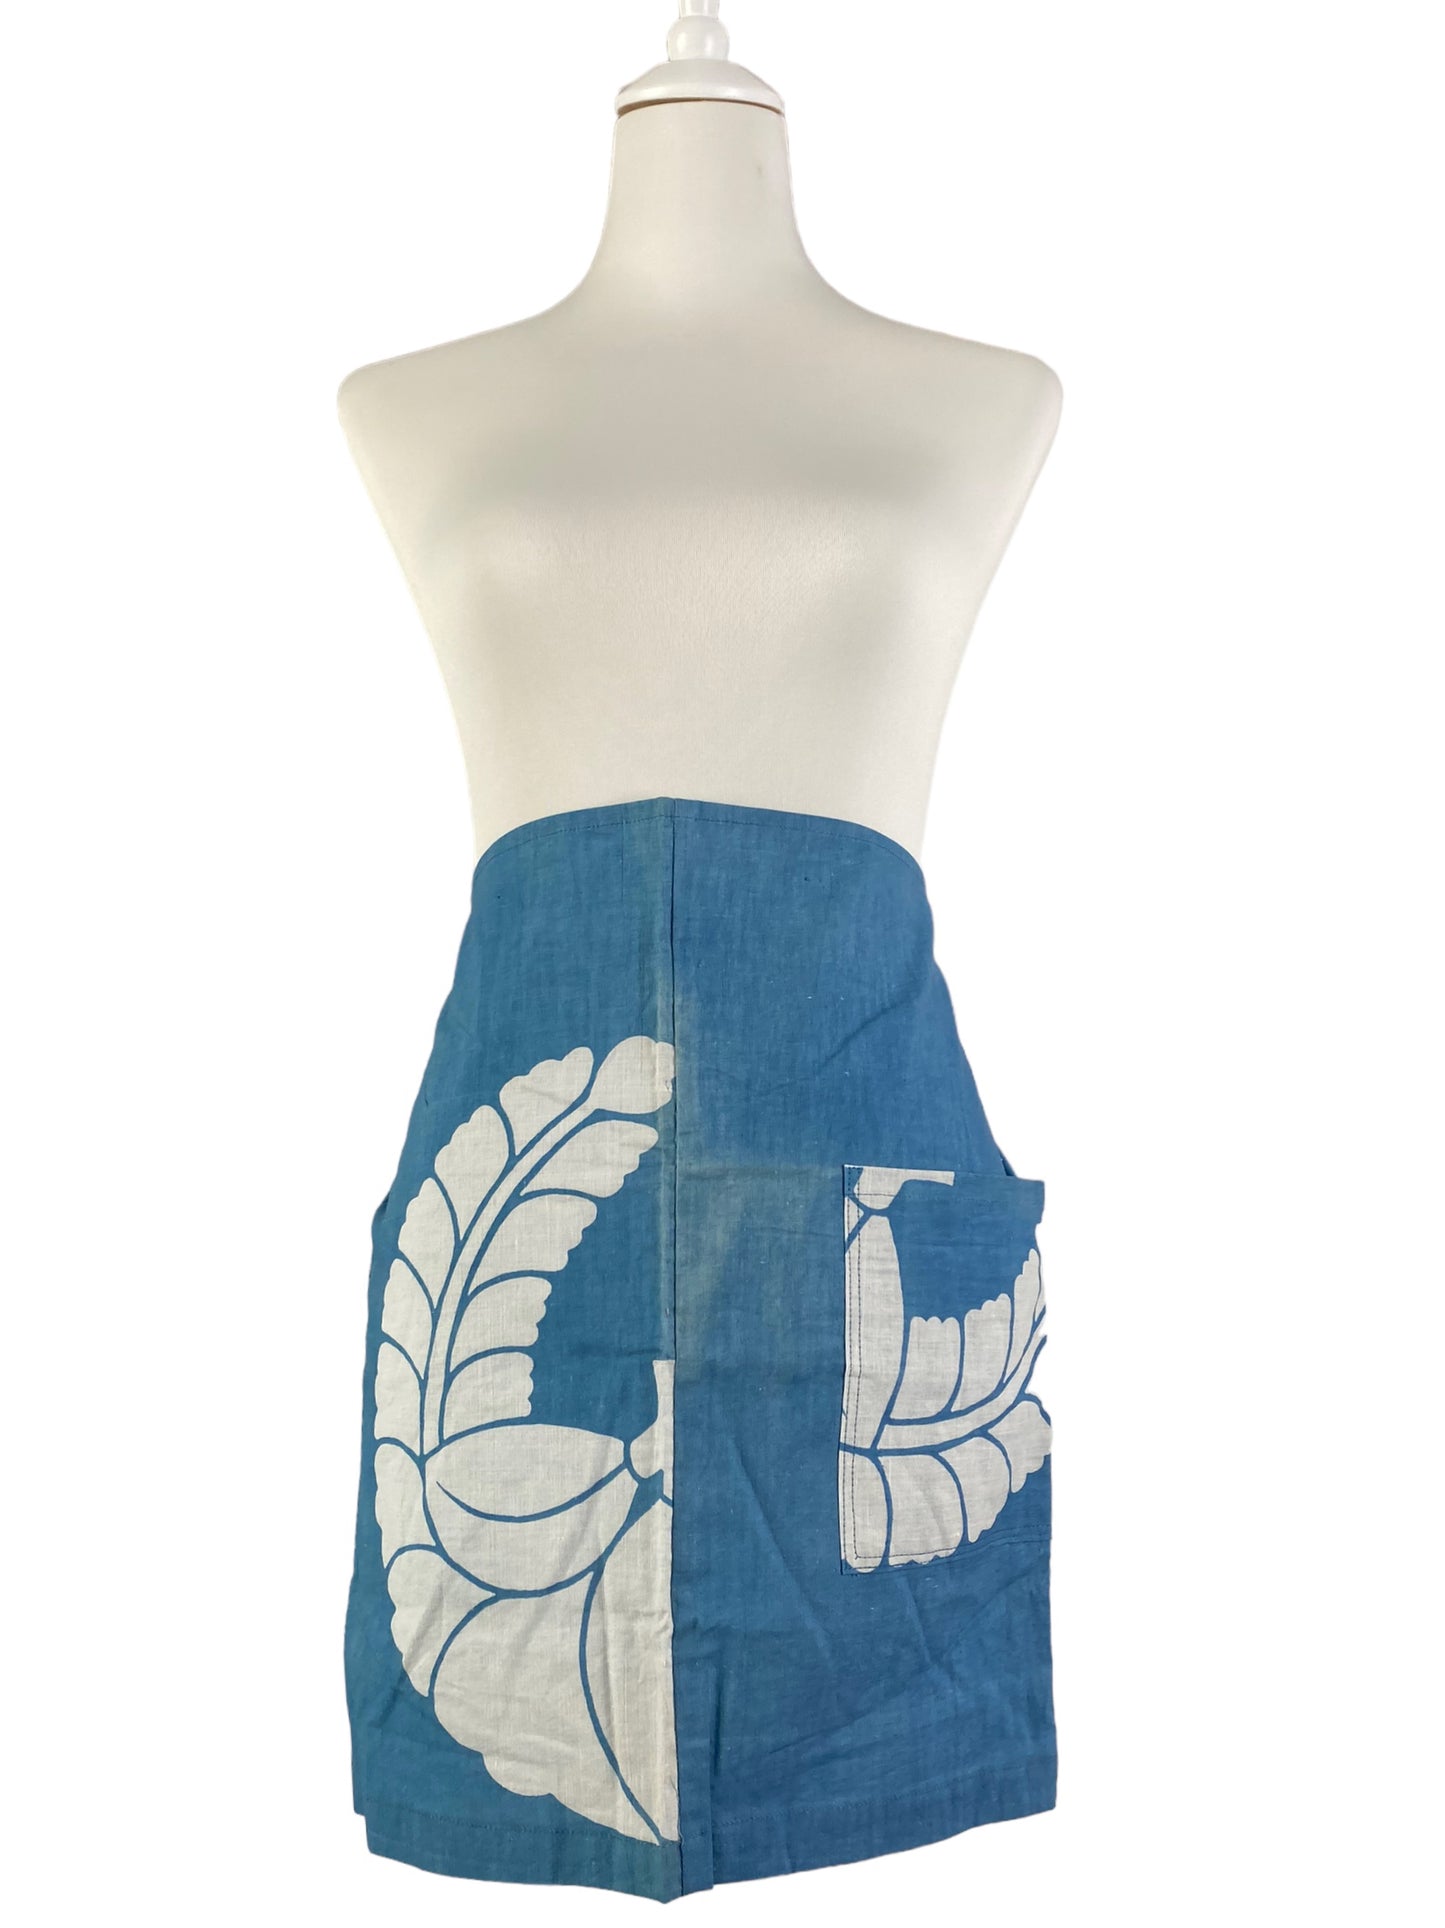 Blue indigo apron with a family crest pattern.